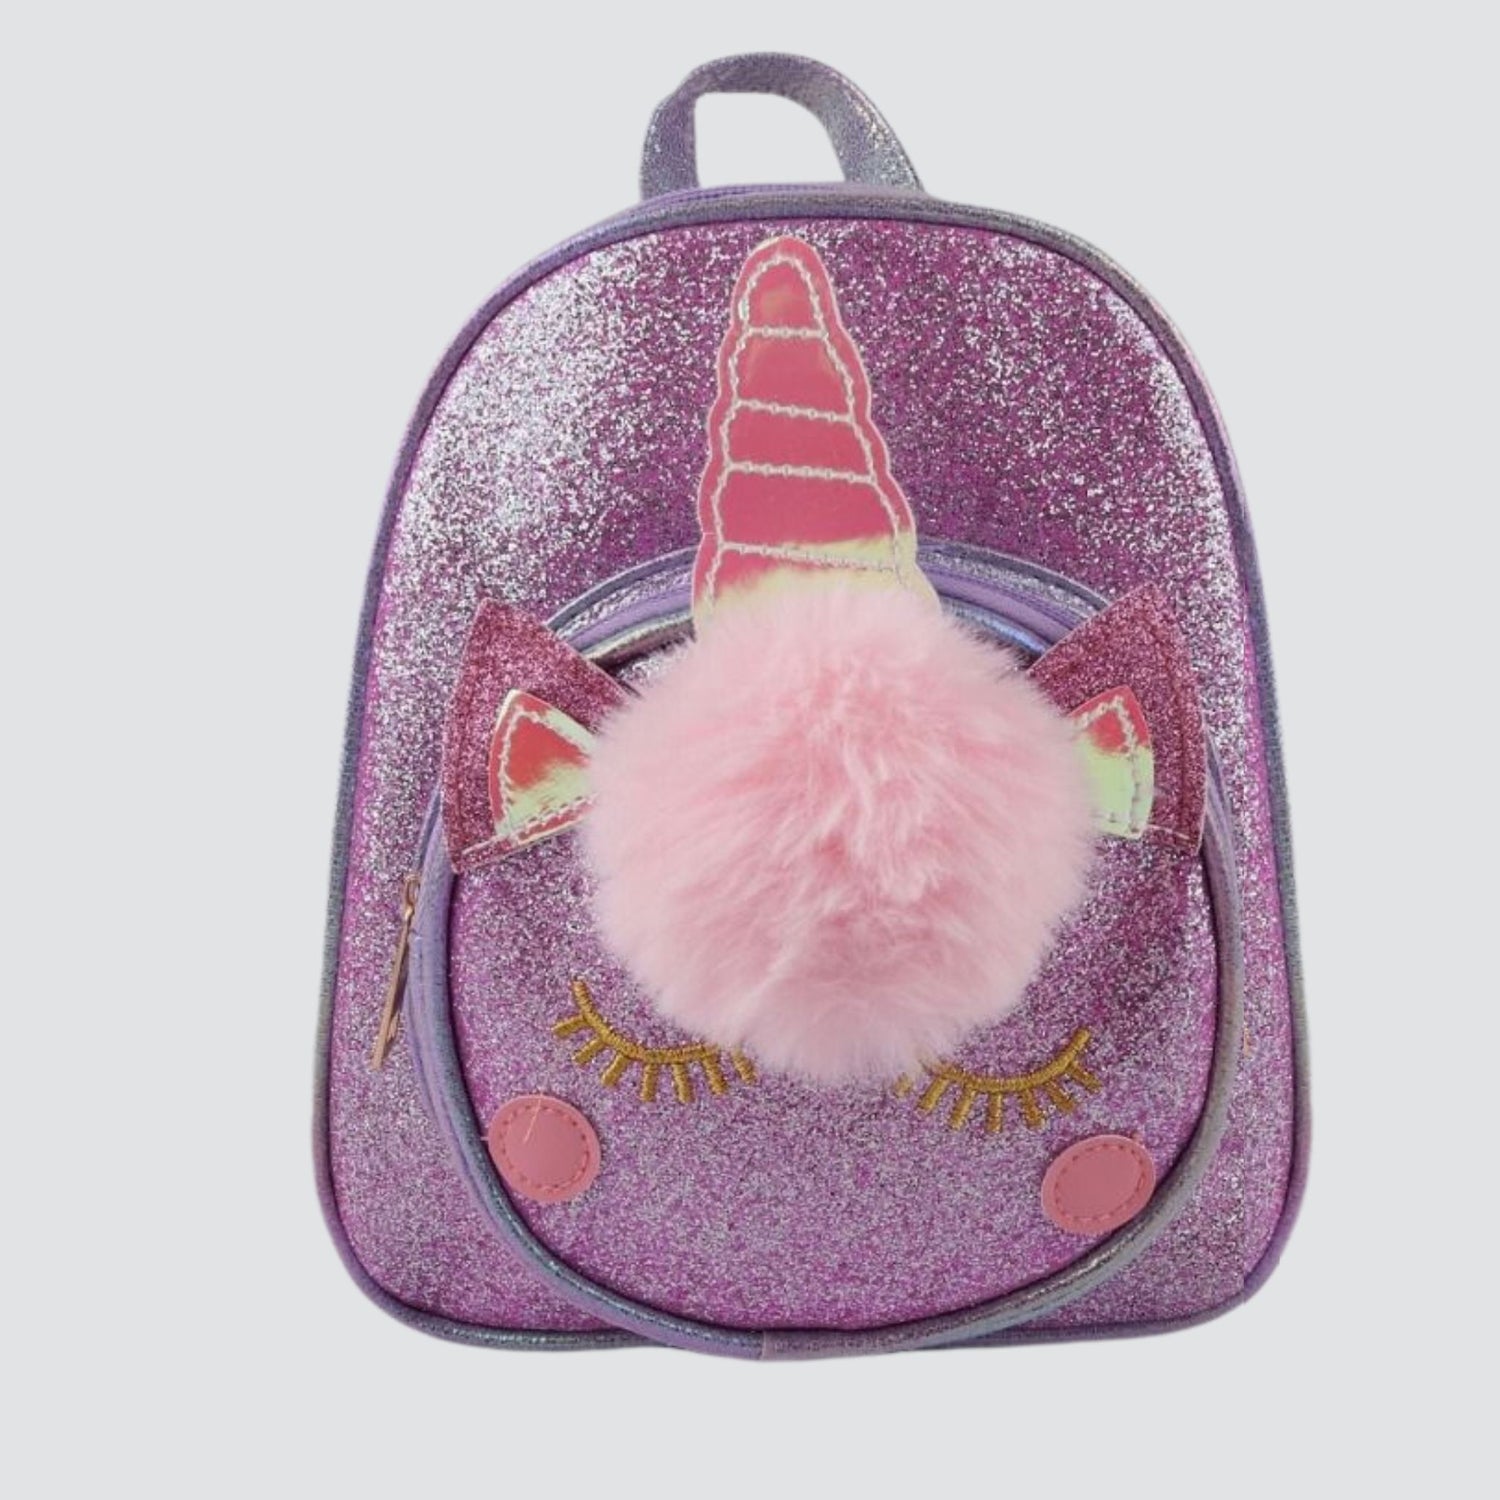 Purple Sparkly Mini Backpack With Unicorn Face